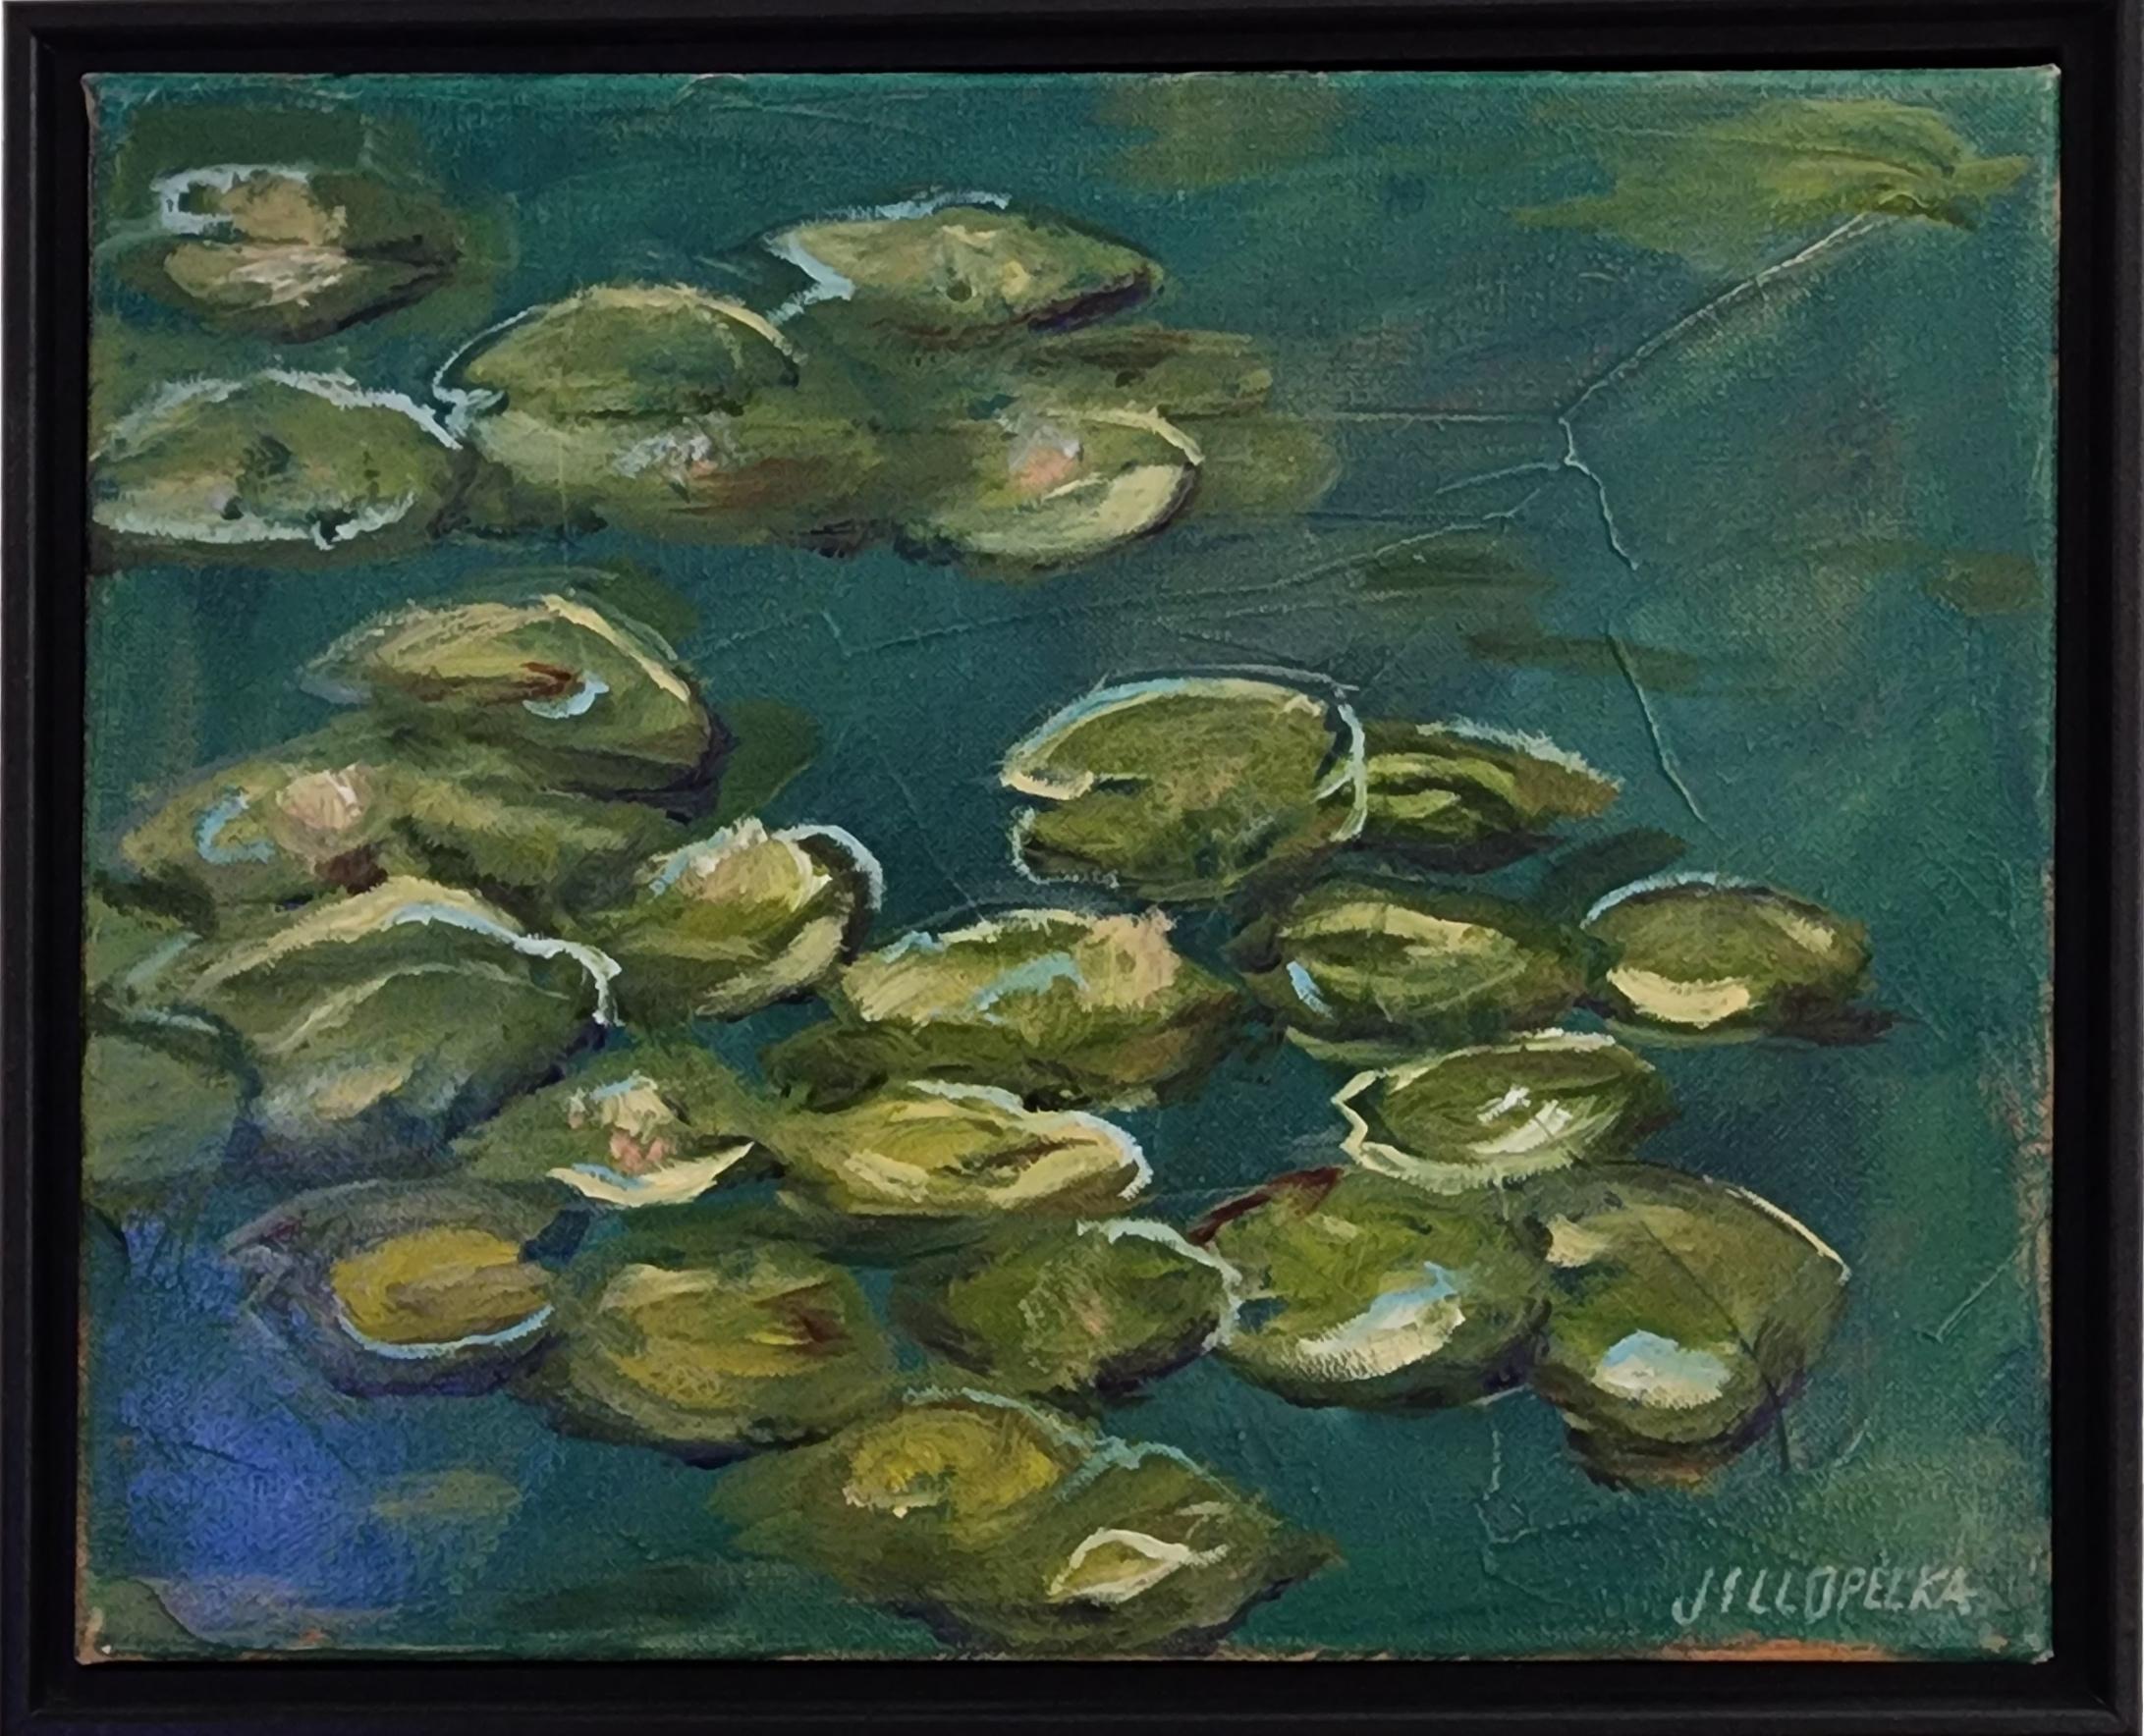 Jill Opelka Landscape Painting - Lily Pads (Flowers, Waterscape, Green, Saturated)